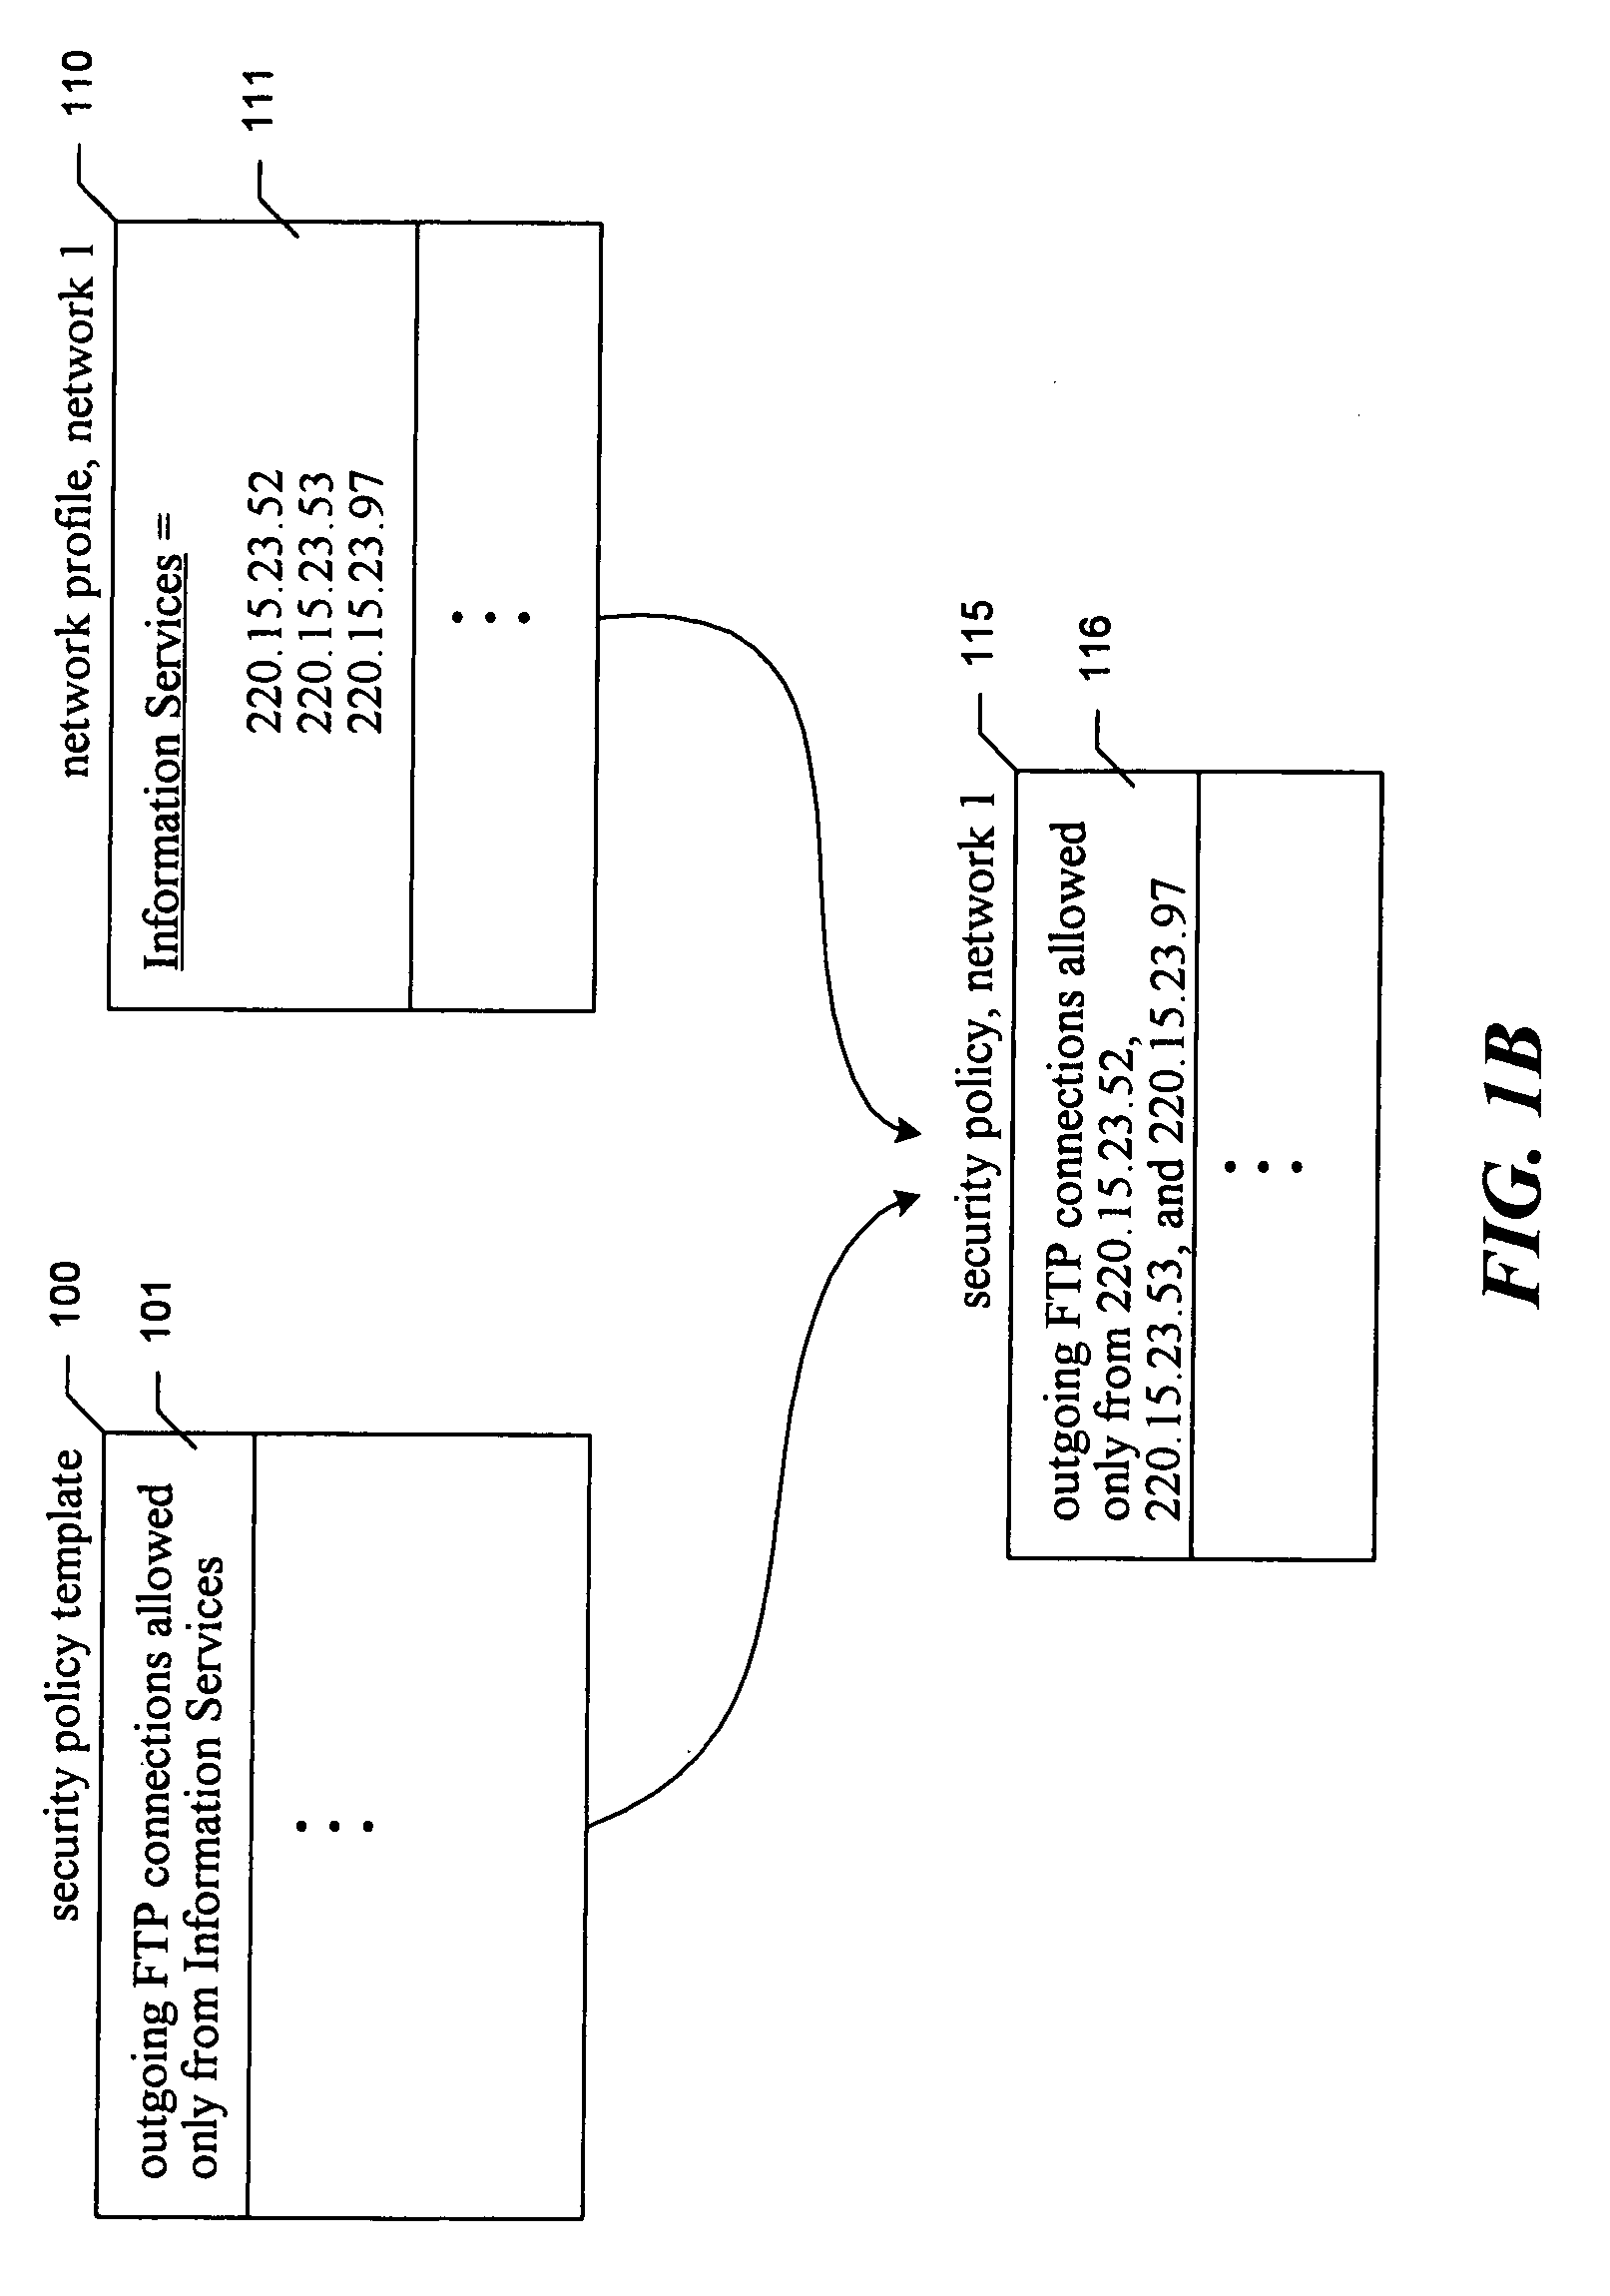 Generalized network security policy templates for implementing similar network security policies across multiple networks